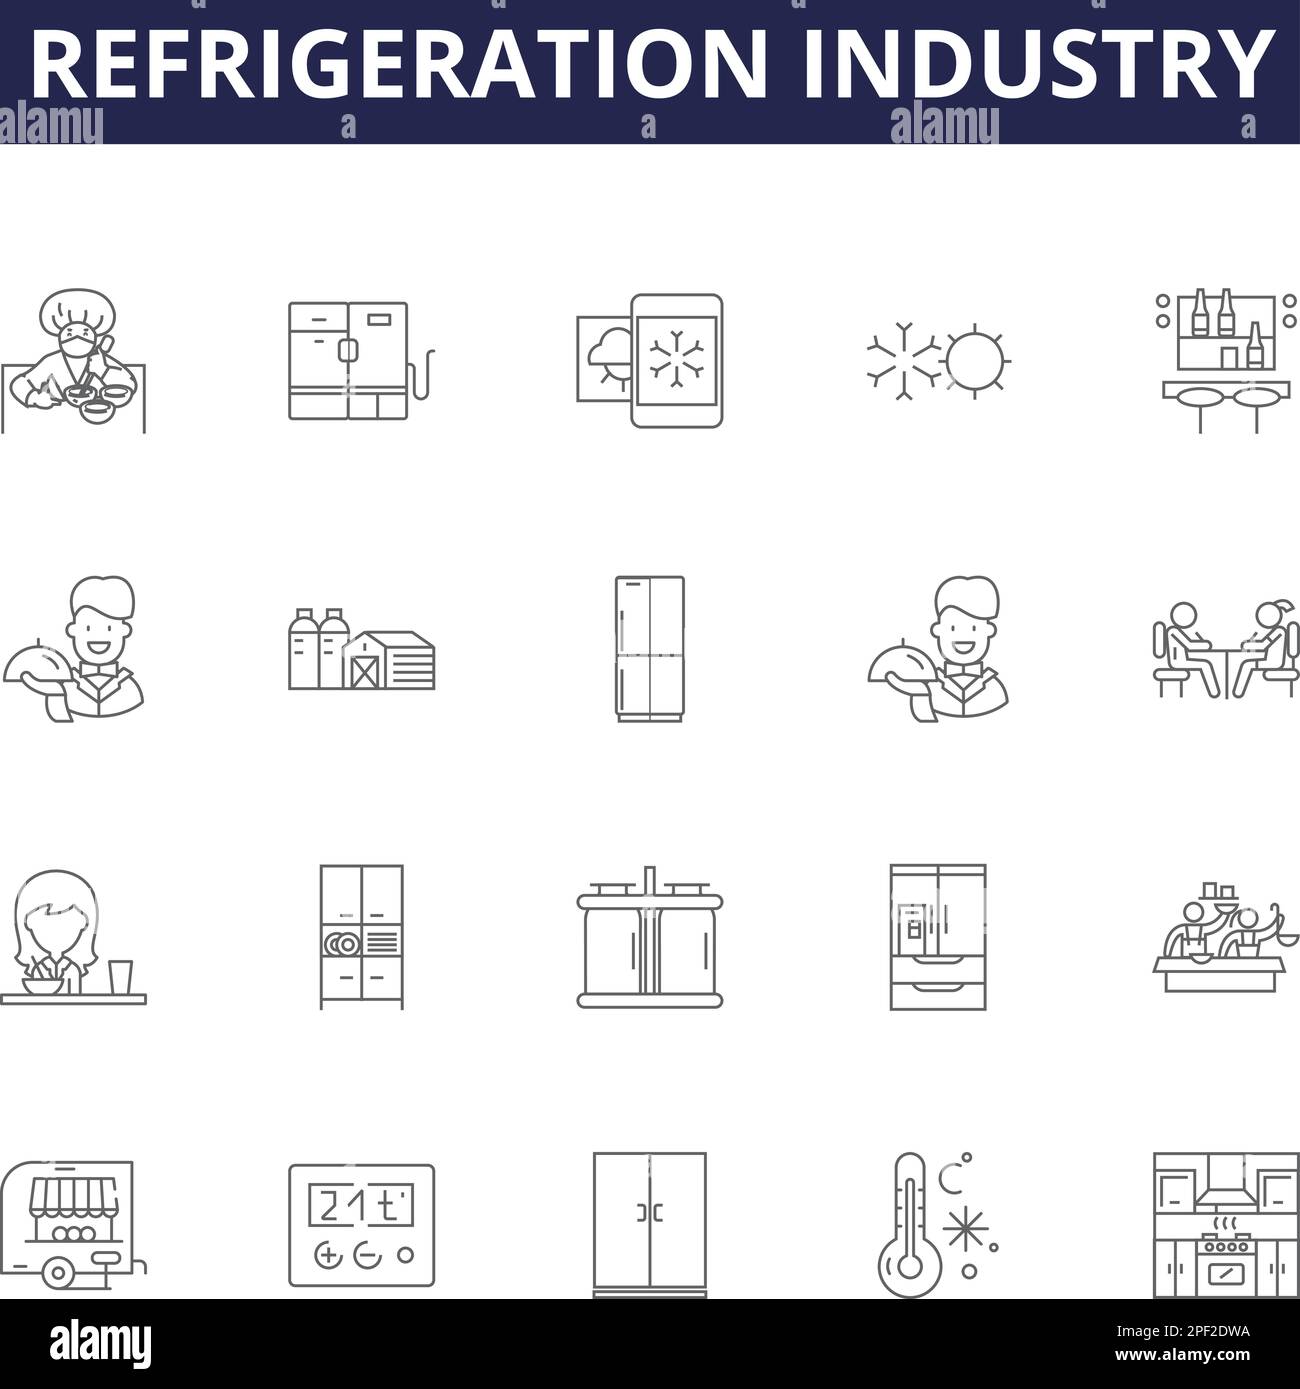 Refrigeration industry line vector icons and signs. industry, cooling, HVAC, compressors, chillers, condensers, thermodynamics, insulation outline Stock Vector